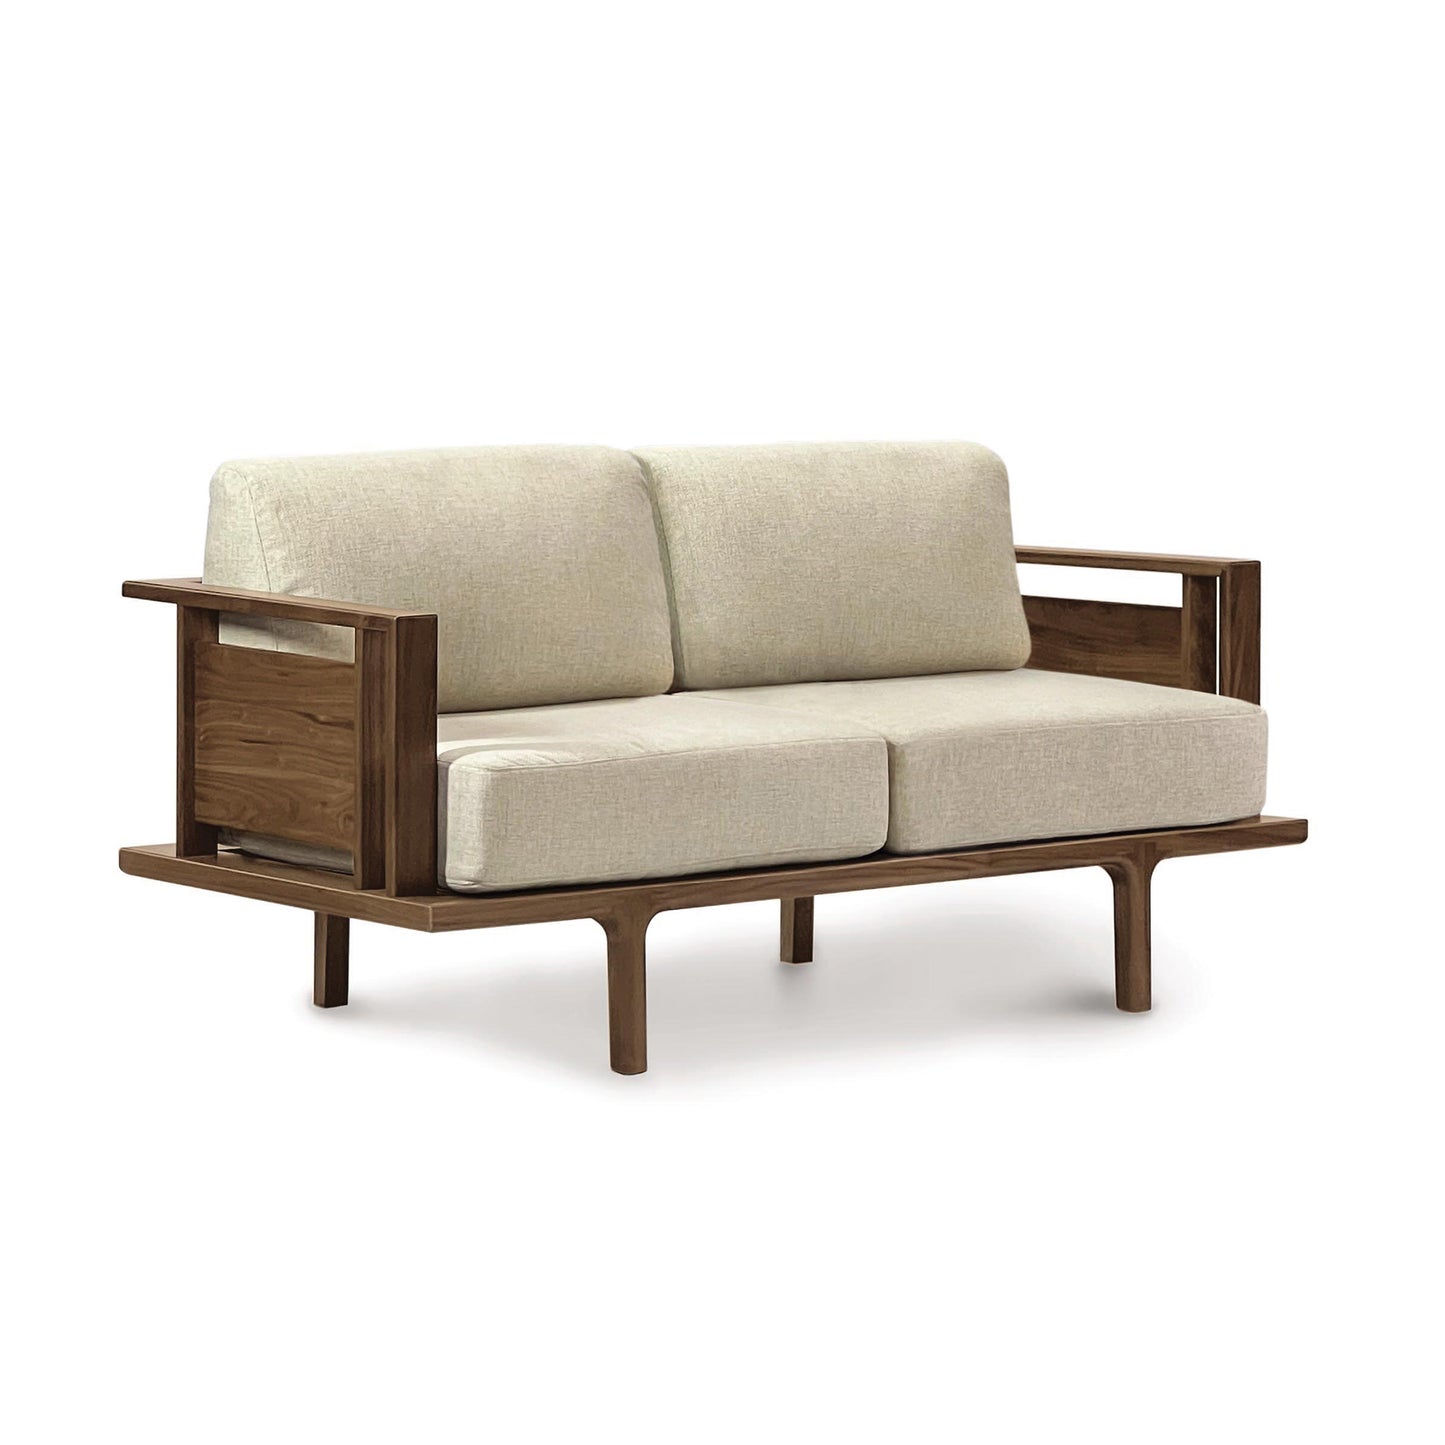 A contemporary Copeland Furniture Sierra Walnut Upholstered Loveseat with a natural walnut frame and beige fabric.